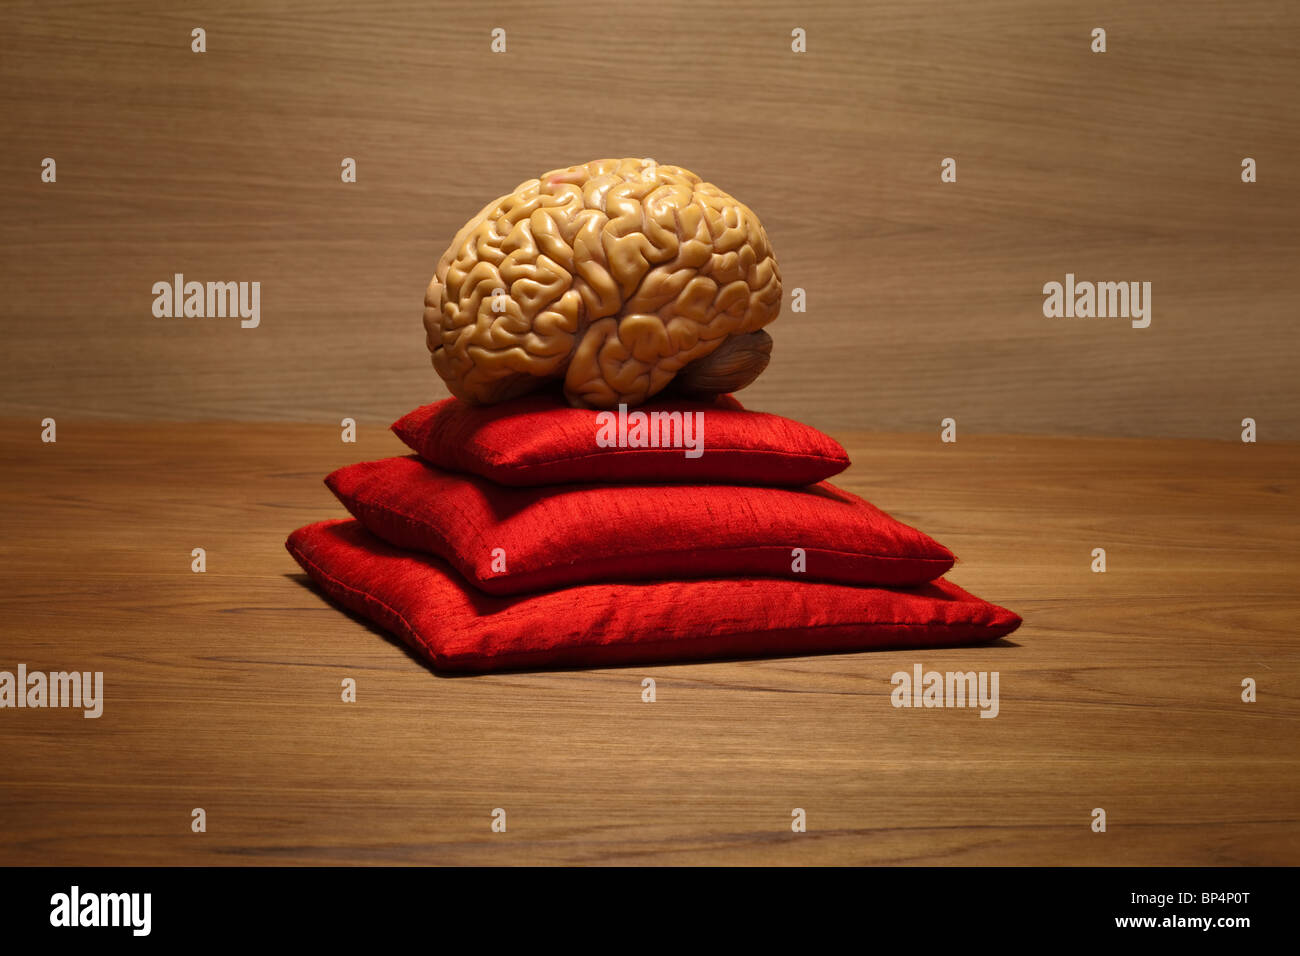 concept brain on red pillows Stock Photo